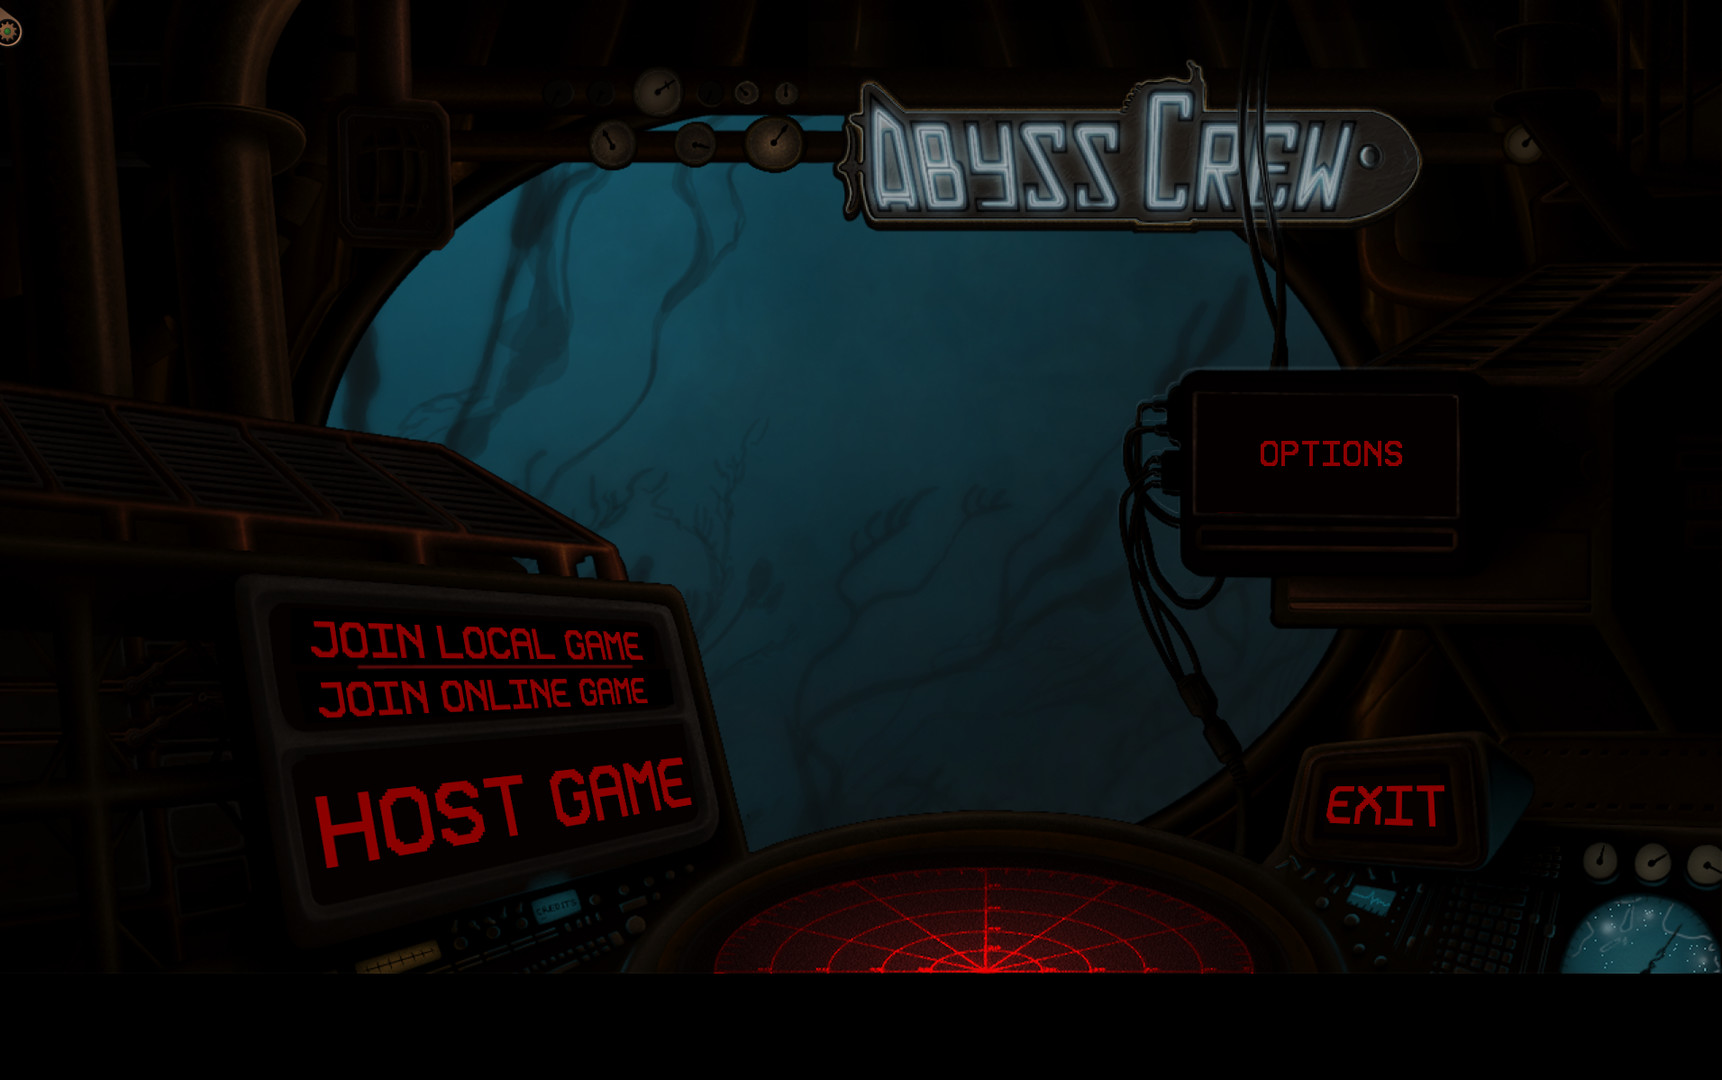 Abyss Crew Free Download